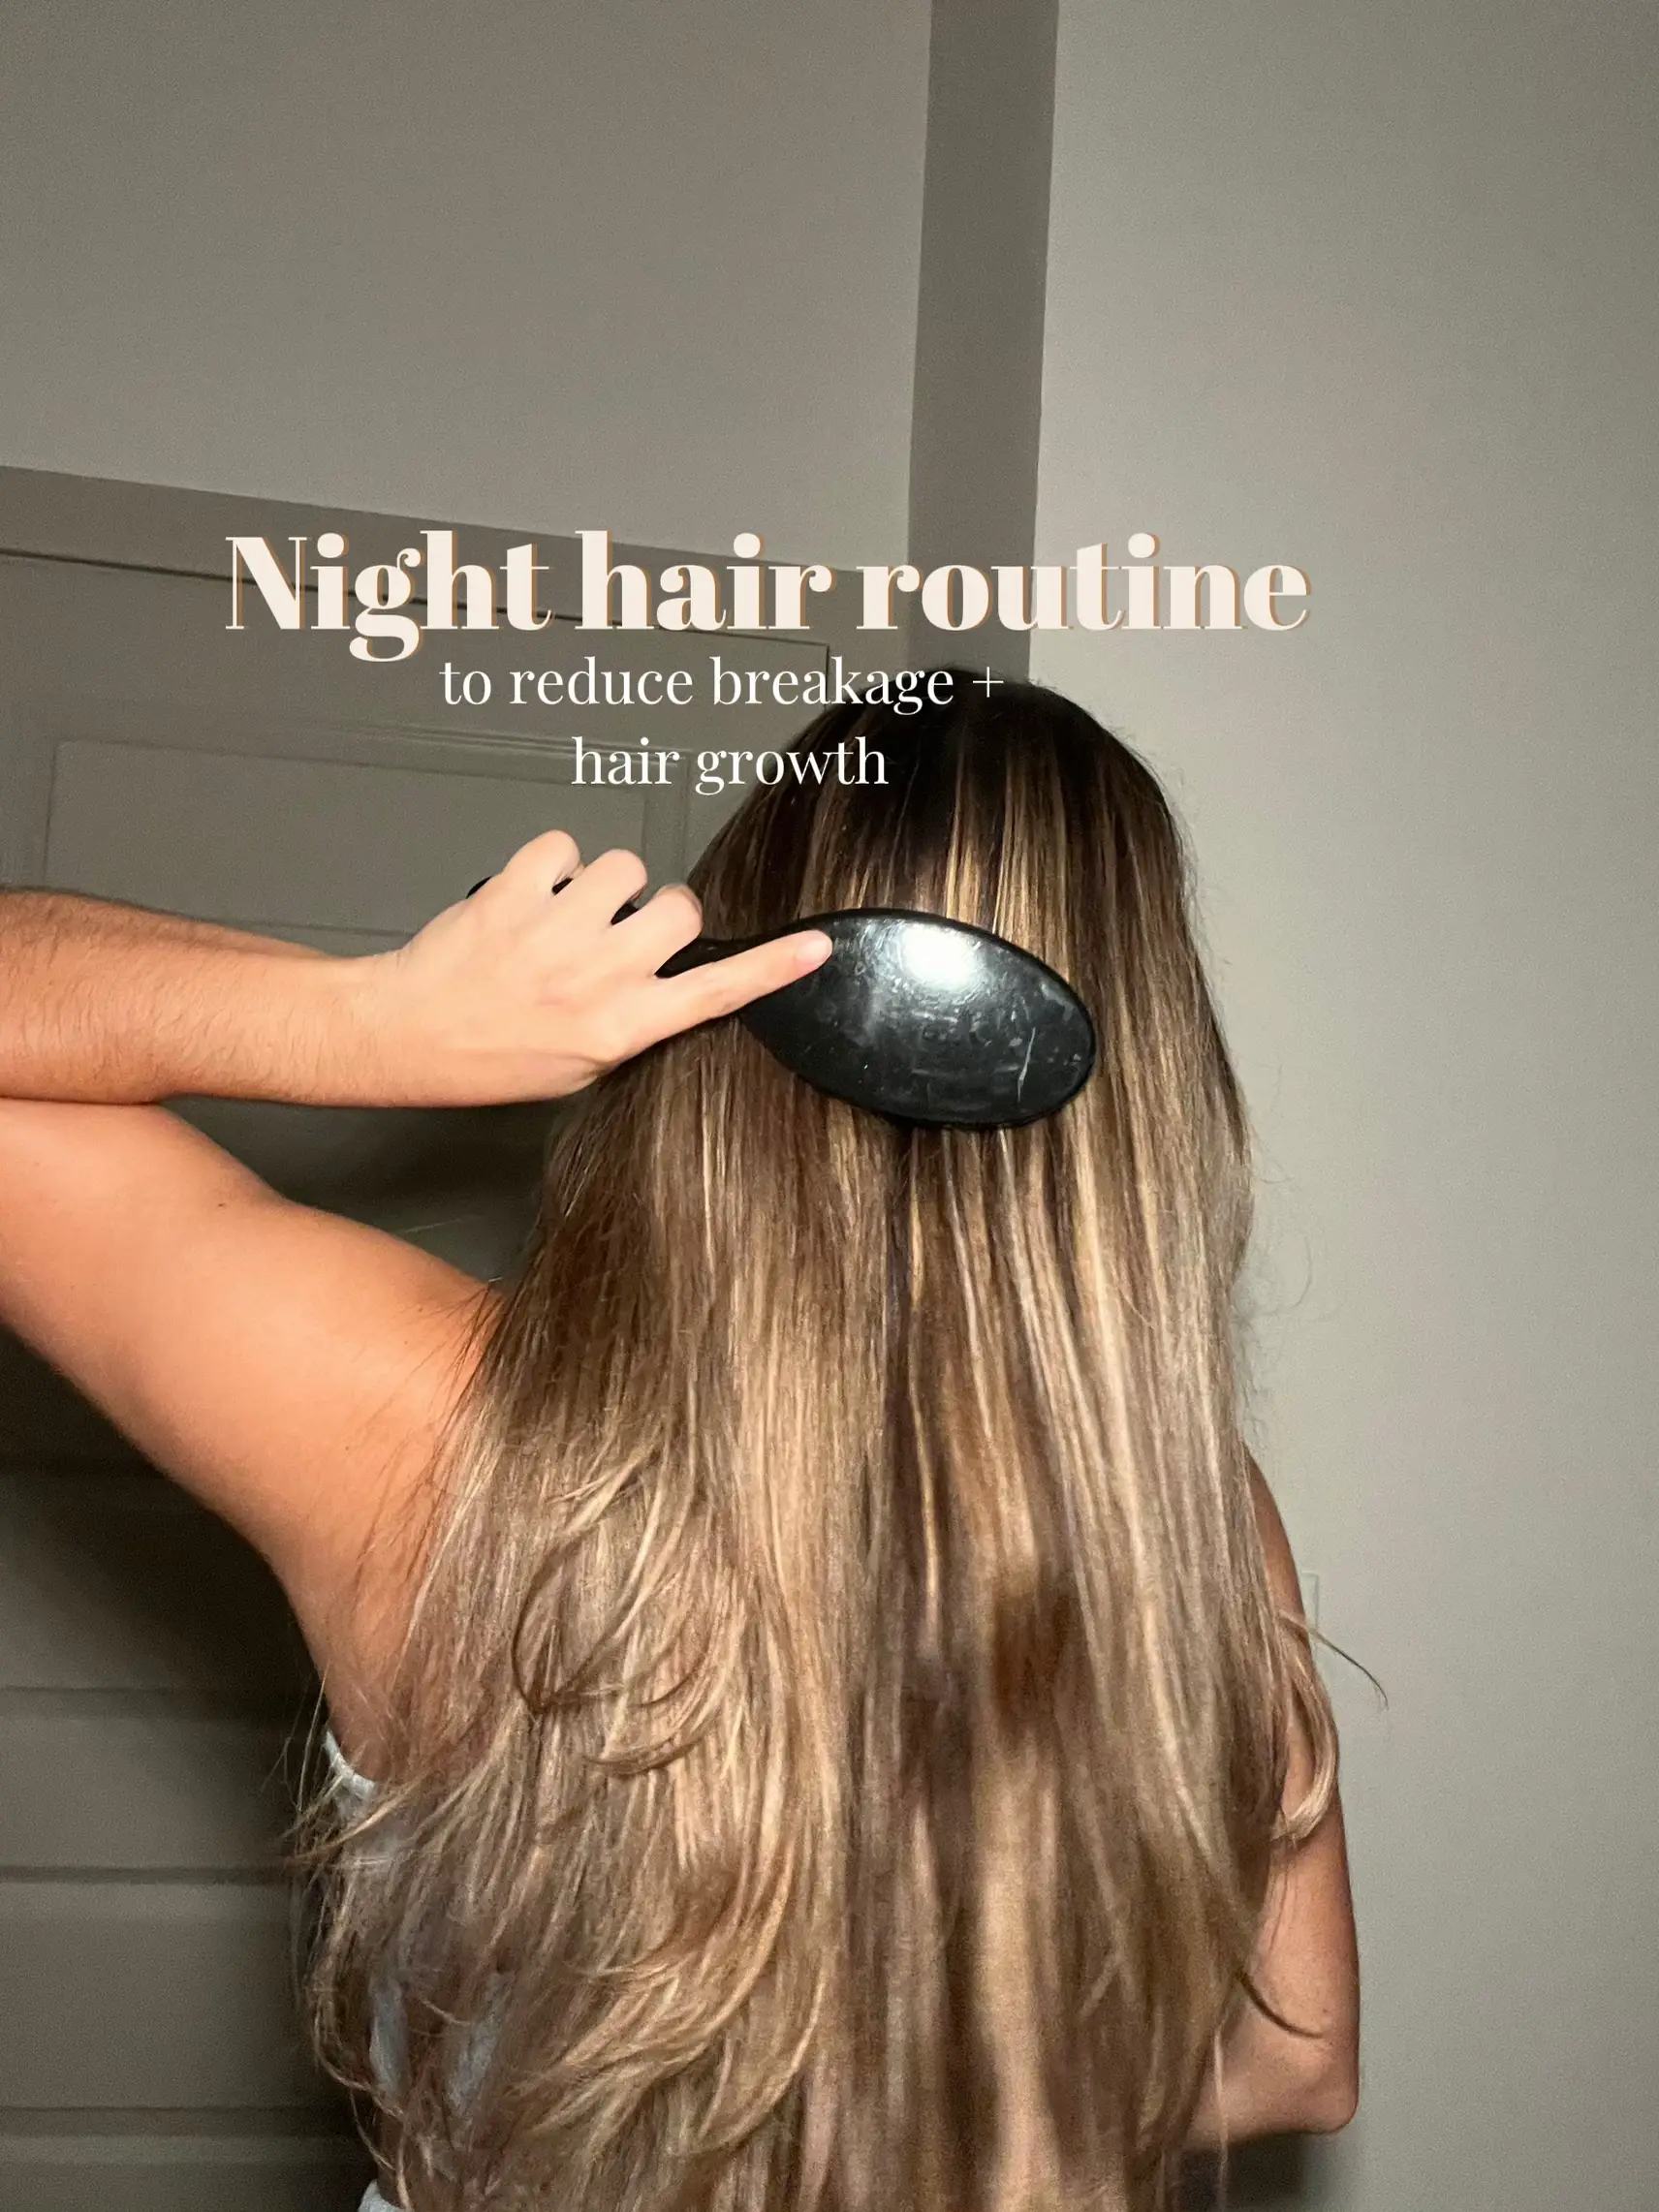 How To Tie Hair At Night For Hair Growth? – Vedix